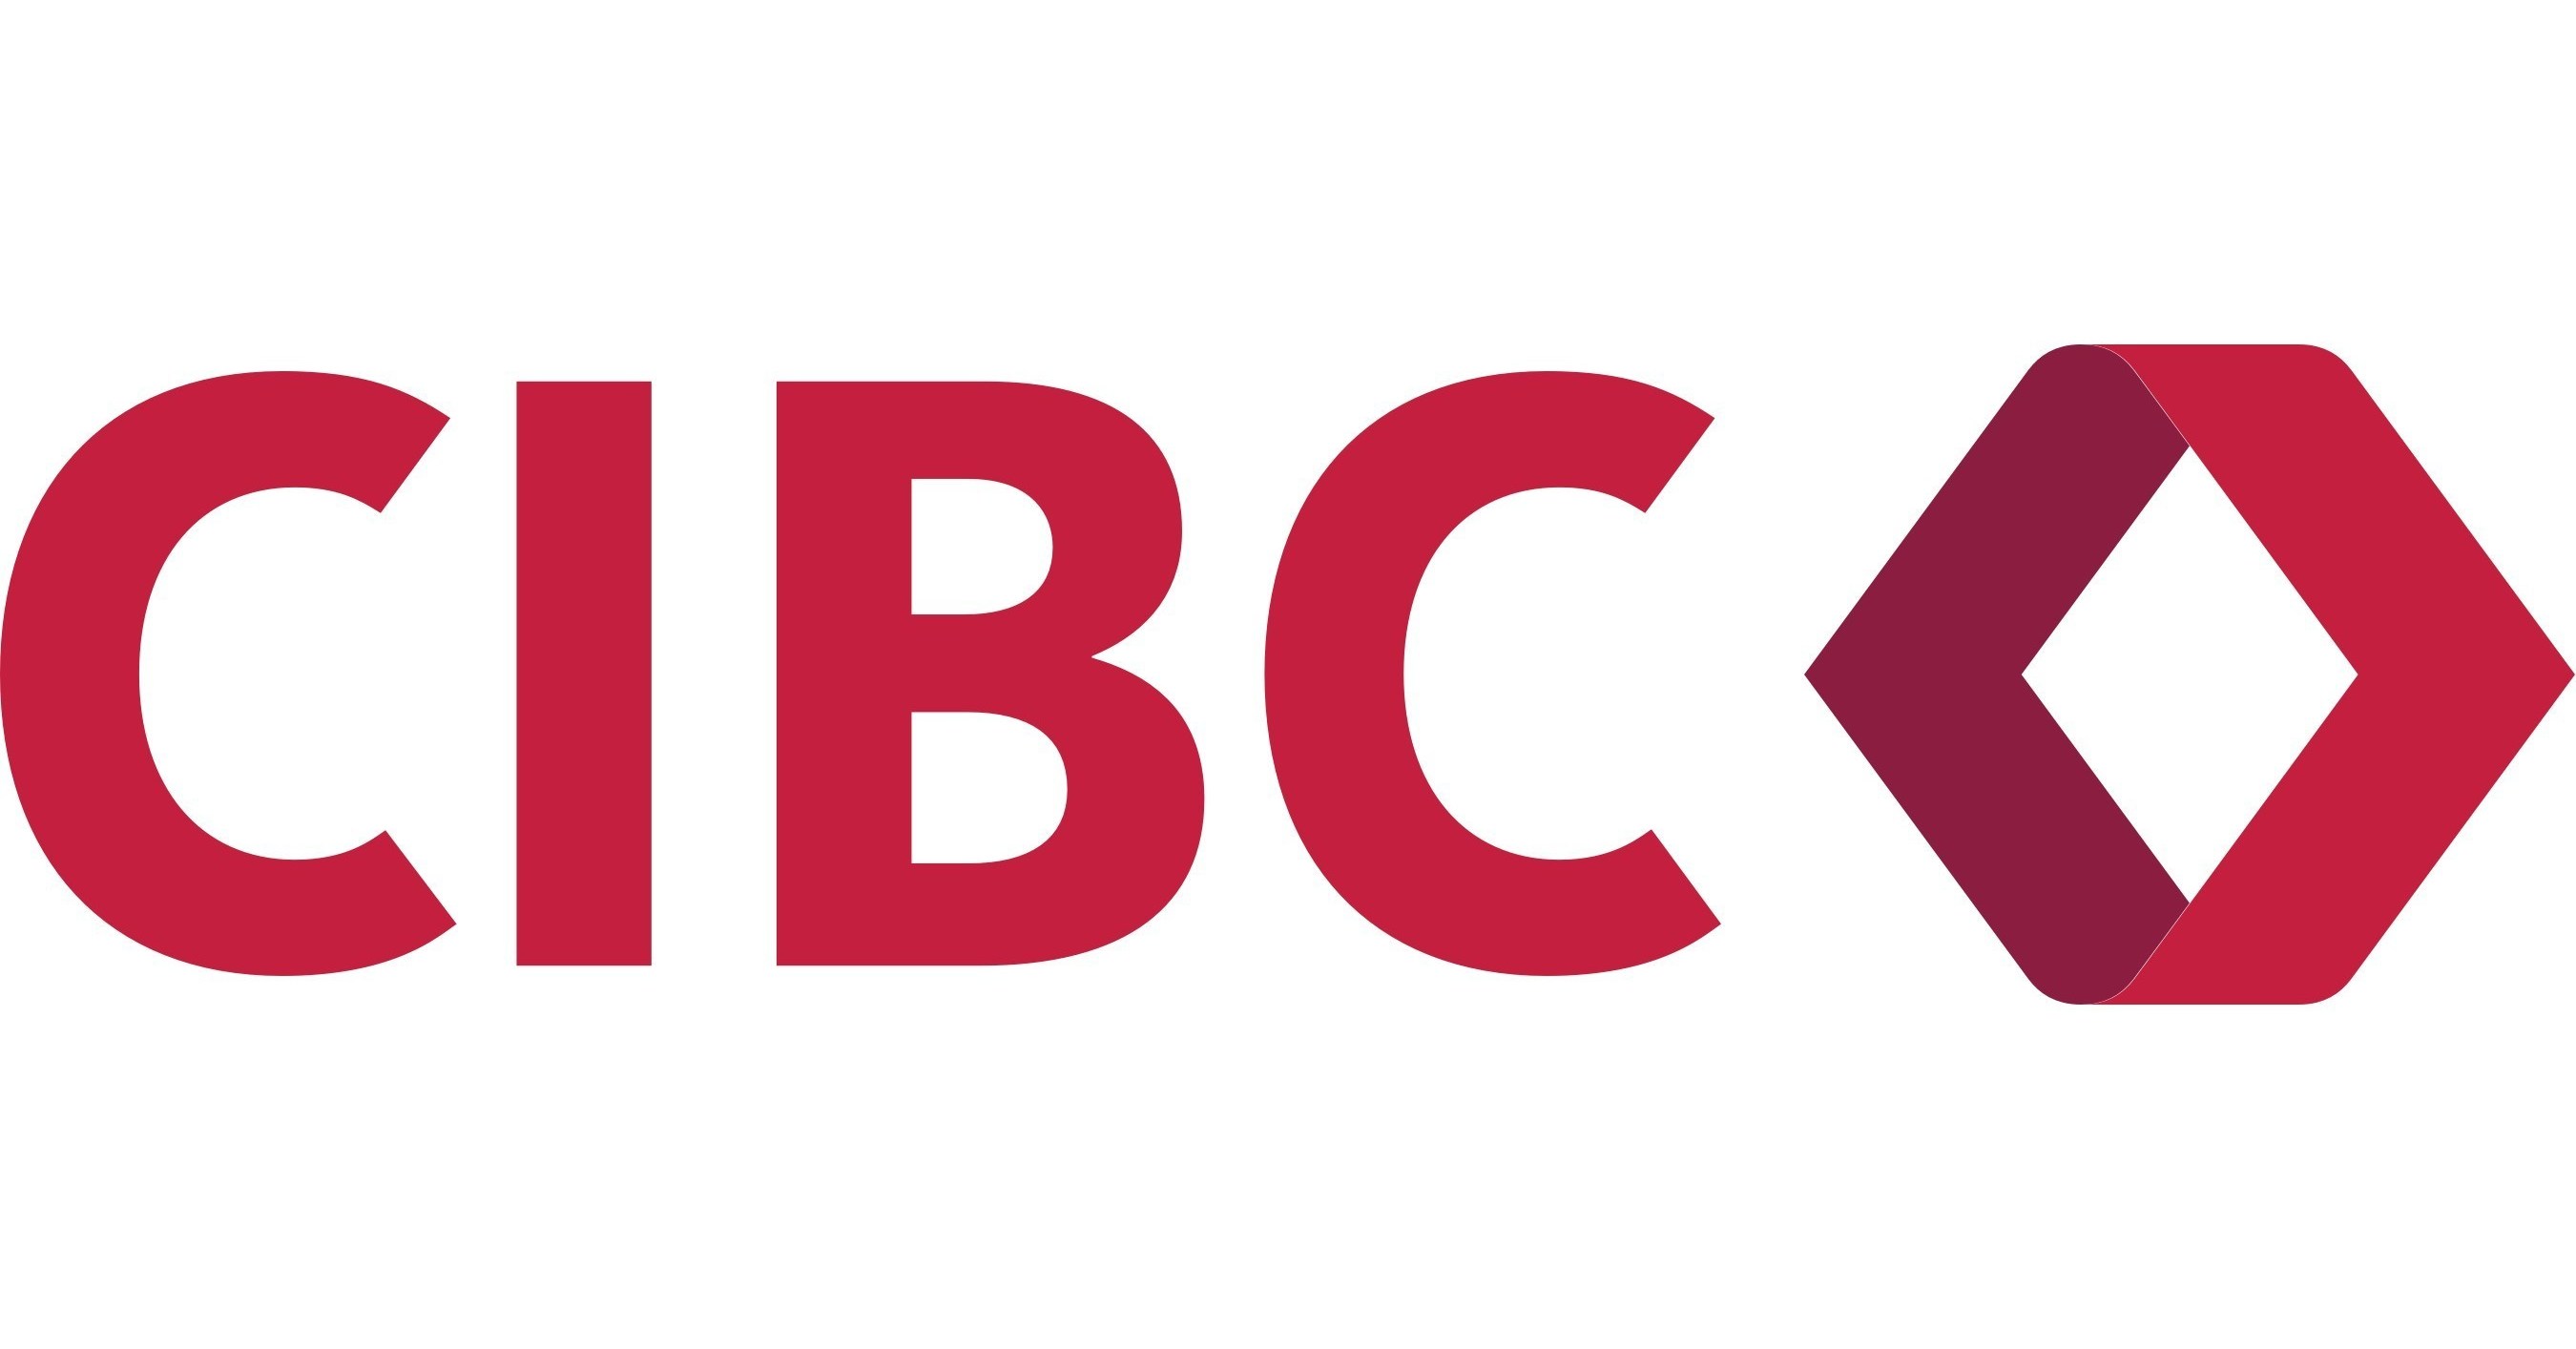 CIBC Increases Dividends for the Quarter Ending January 31, 2023 Dec